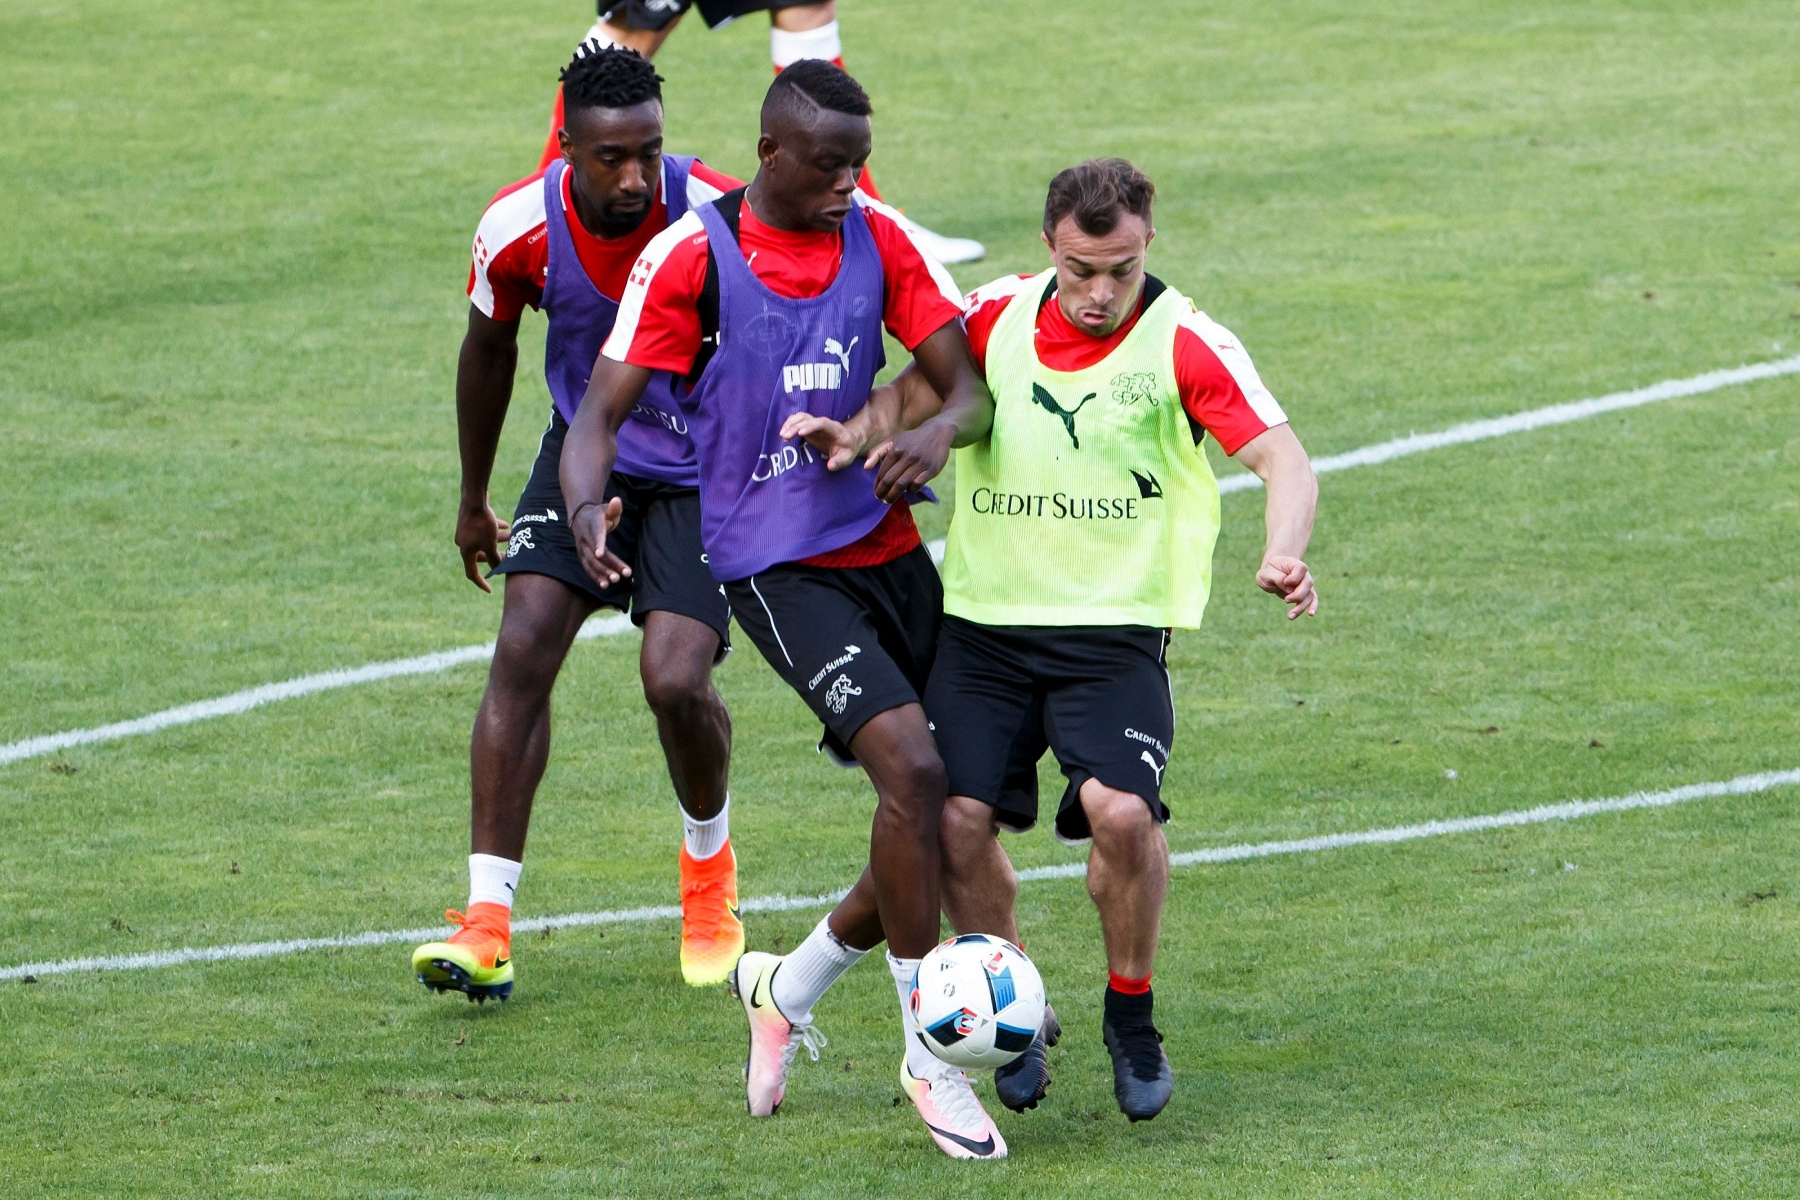 Switzerland's players Denis Zakaria, center, and Xherdan Shaqiri, right, vie for the ball past Johan Djourou, left, during a training session of the national soccer team of Switzerland one day before an international friendly test match against Belgium, at the stade de Geneve stadium, in Geneva, Switzerland, Friday, May 27, 2016. The Switzerland national soccer team prepares for the UEFA Euro 2016 that will take place from June 10 to July 10, 2016 in France. (KEYSTONE/Salvatore Di Nolfi) SWITZERLAND SOCCER TEAM SWITZERLAND TRAINING